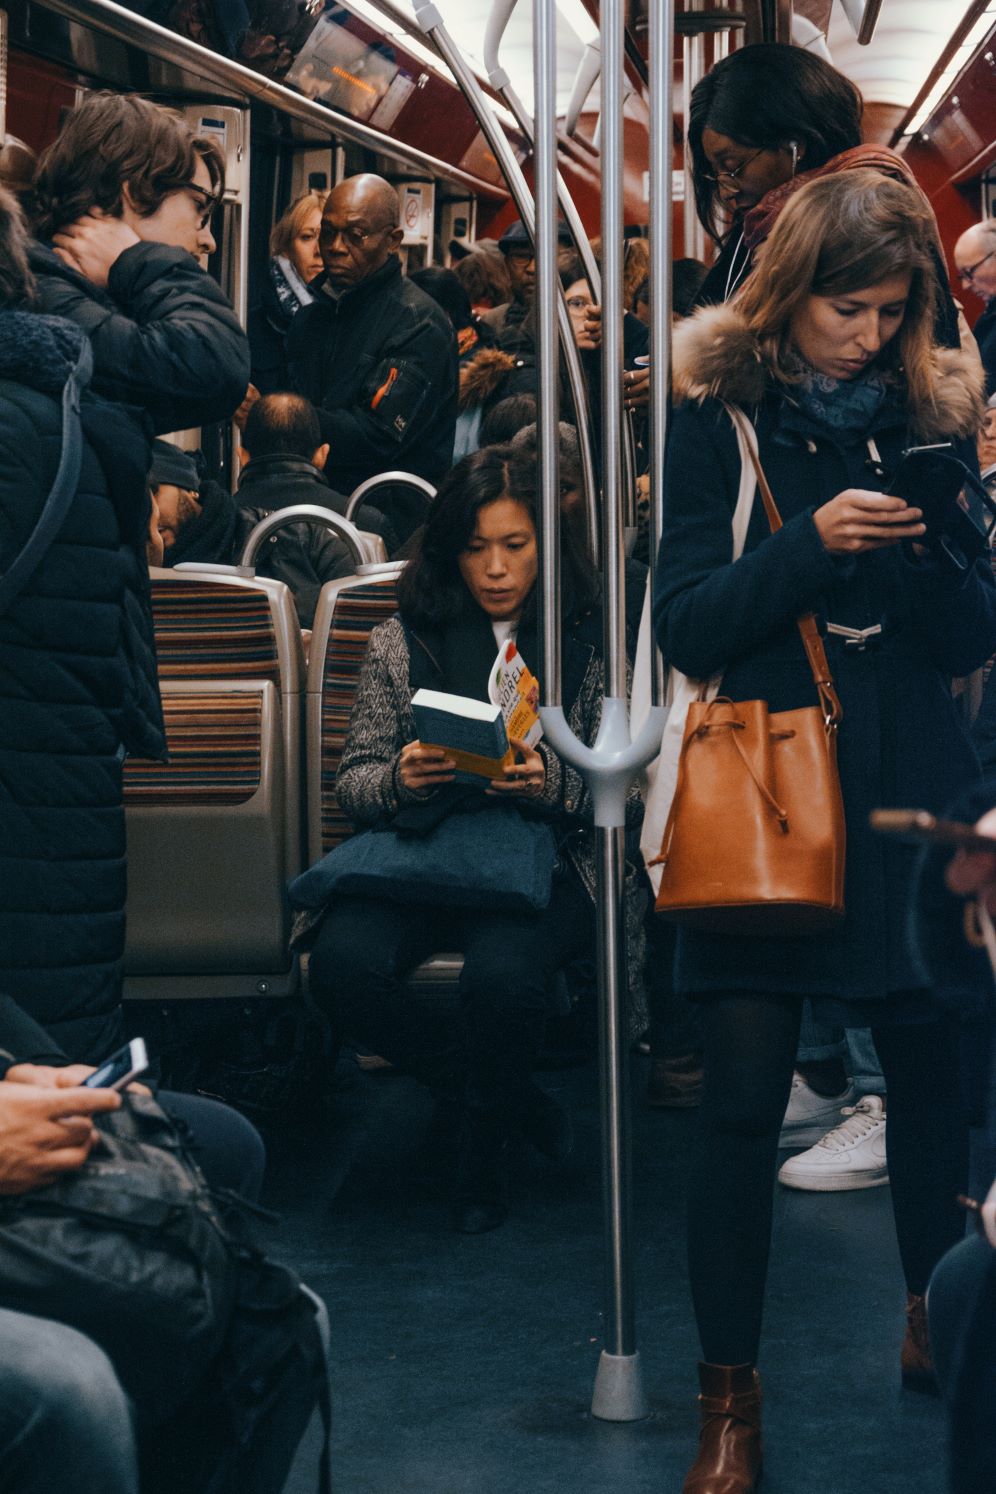 Enhancing commutes: the impact of Wifi in public transport